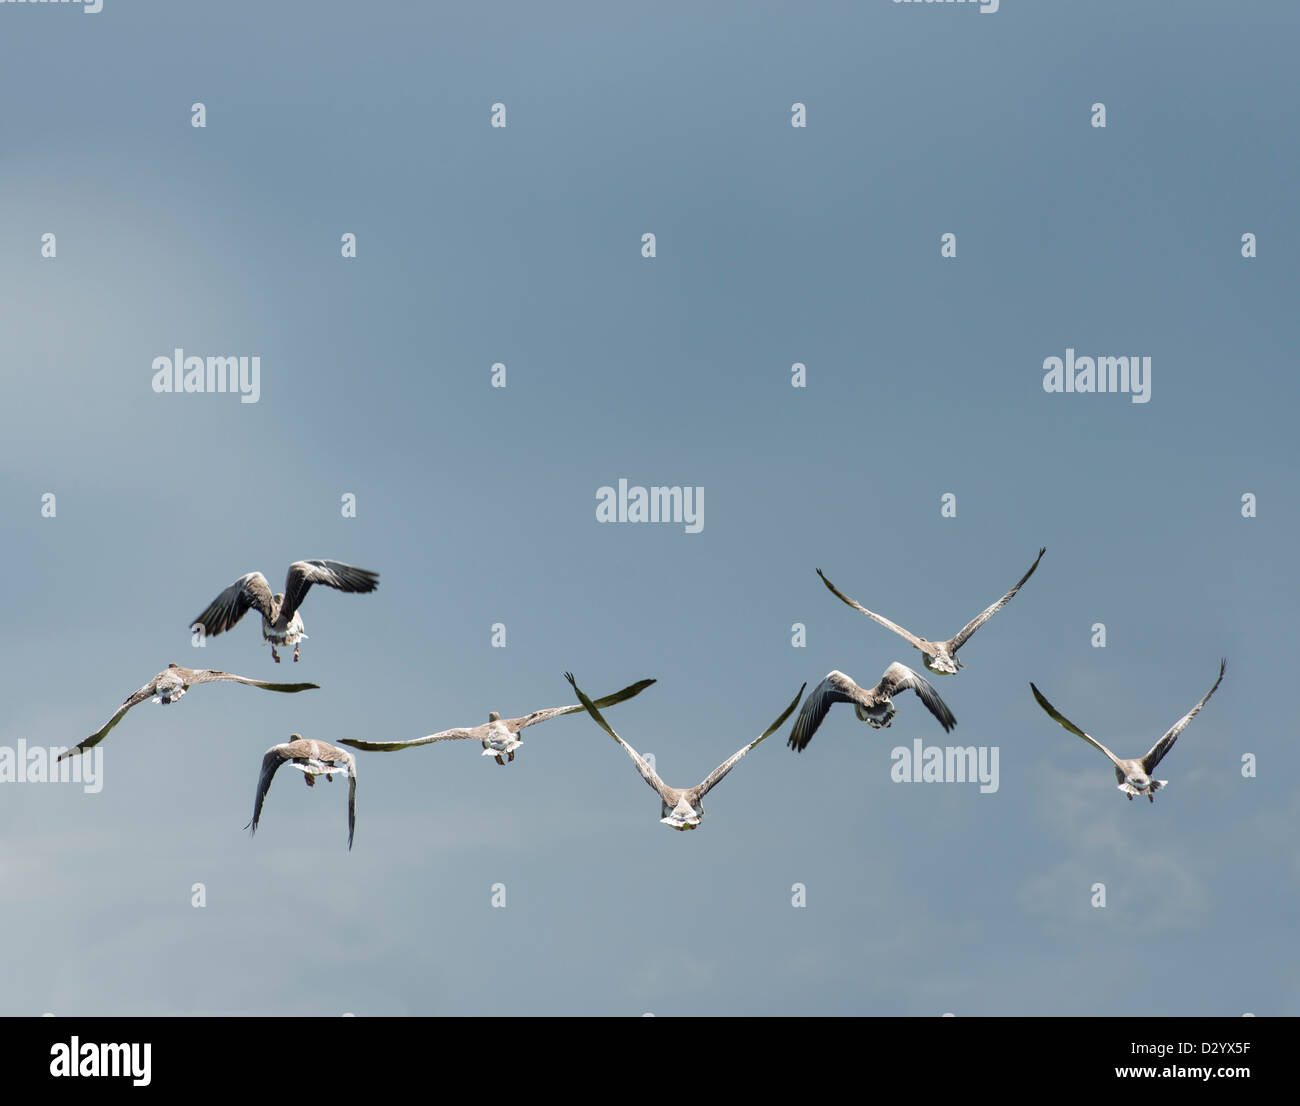 Flock of birds (greylag geese) flying in mid-air viewed from behind, Sweden Stock Photo